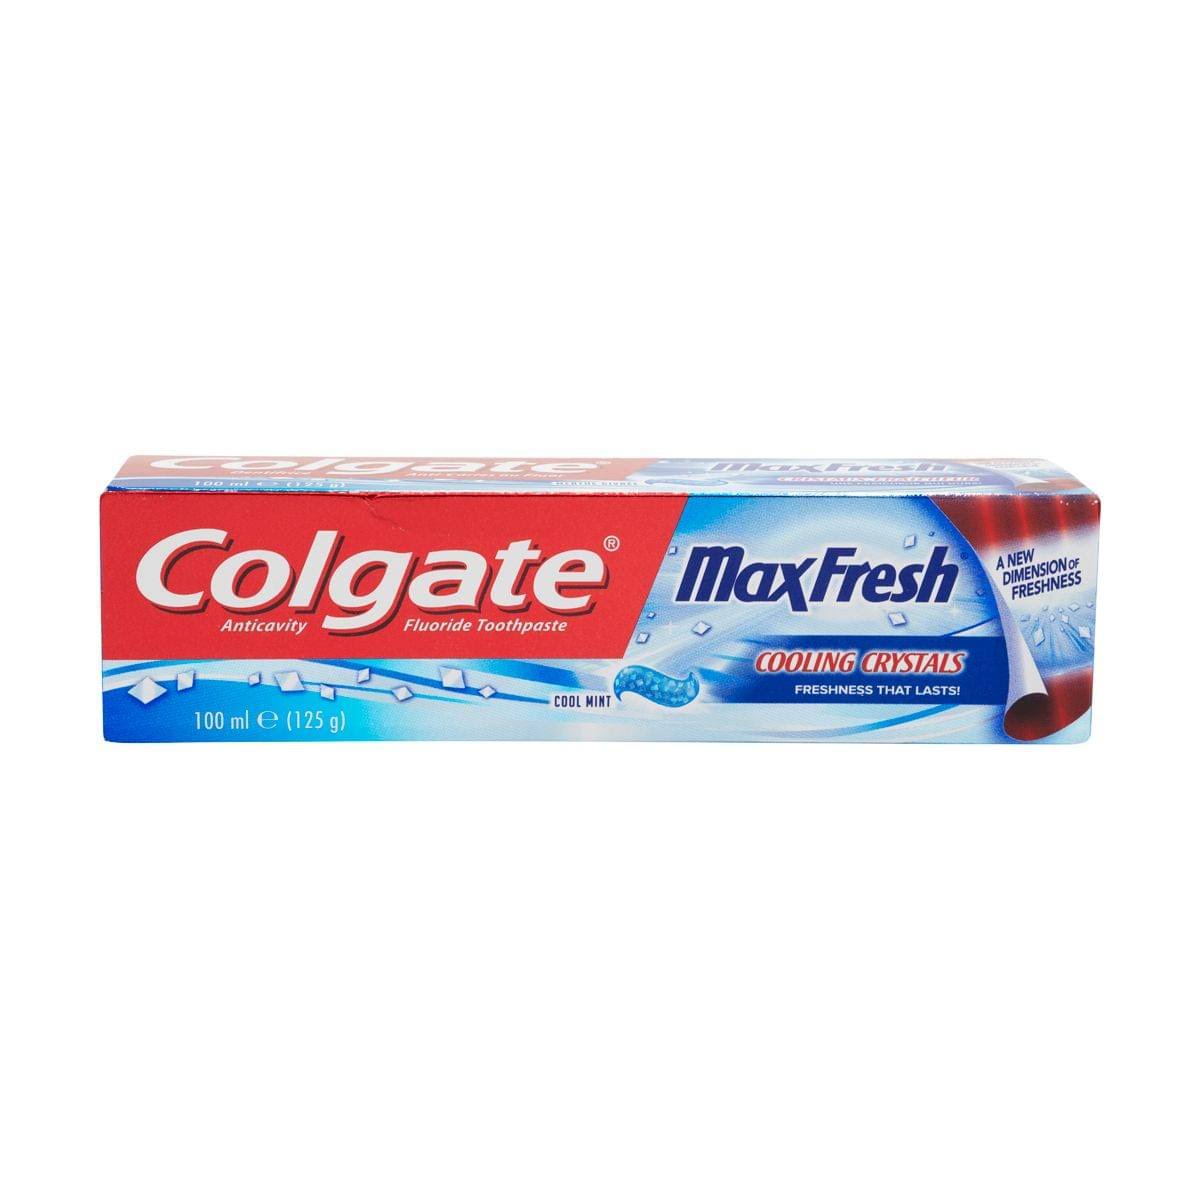 Colgate Toothpaste Max Fresh Cool Mint - 100ml